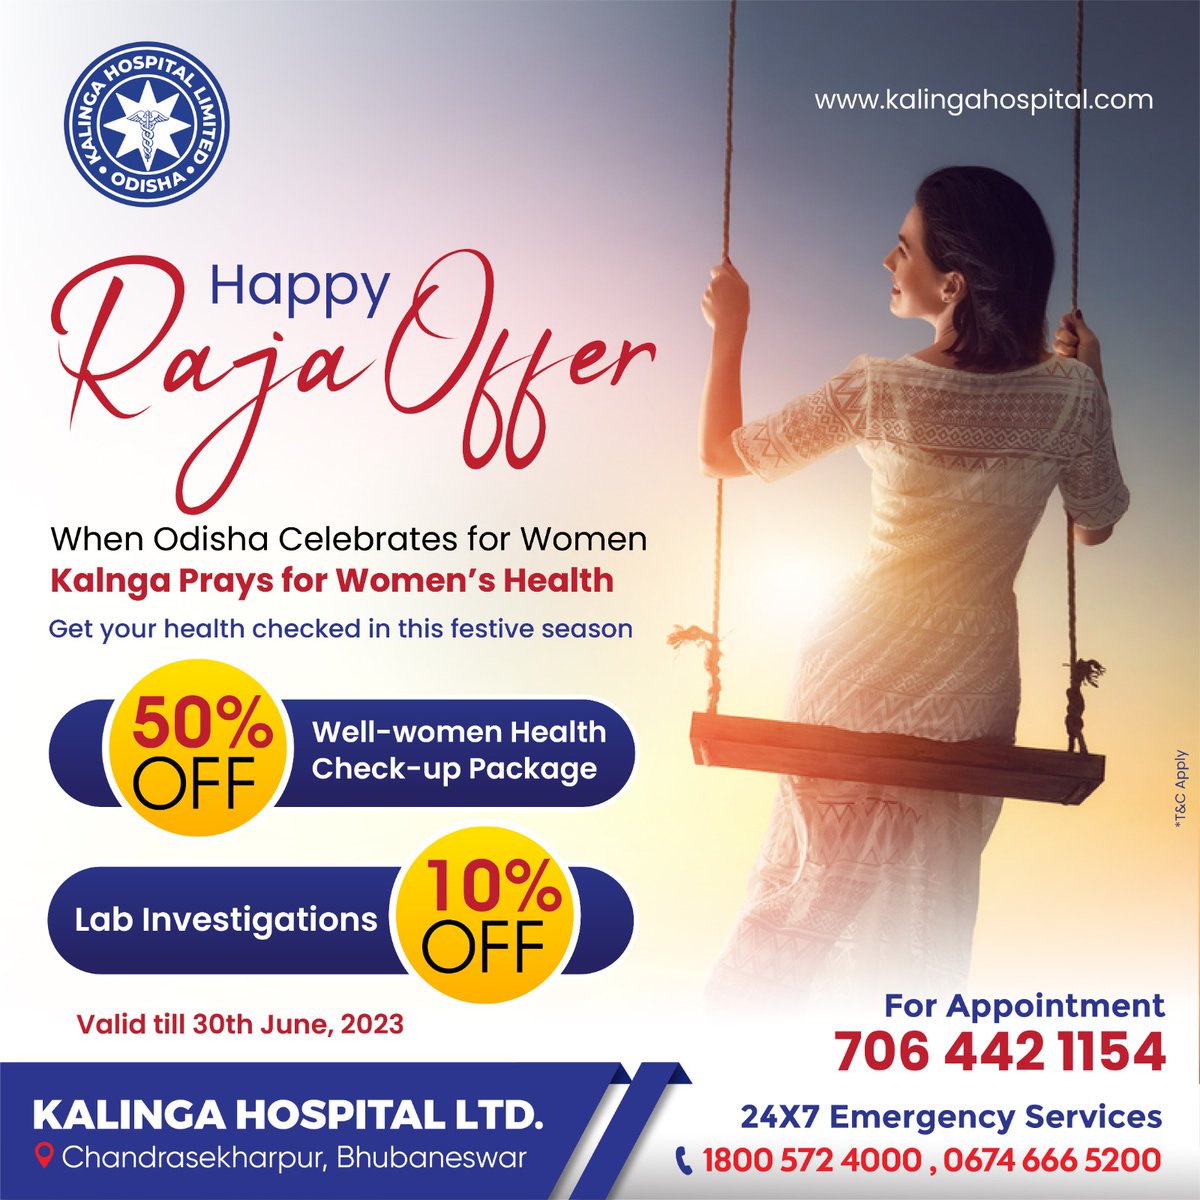 Your Health Our Priority! Unwrap the Gift of Good Health this Raja Sankranti with a Healthy Twist! Avail our exclusive packages valid till 30th June 2023.
#RajaSankrantiOffers #HealthcareDeals #raja #happyraja #womenhood #festiveoffers  #festivalsofodisha  #besthospital